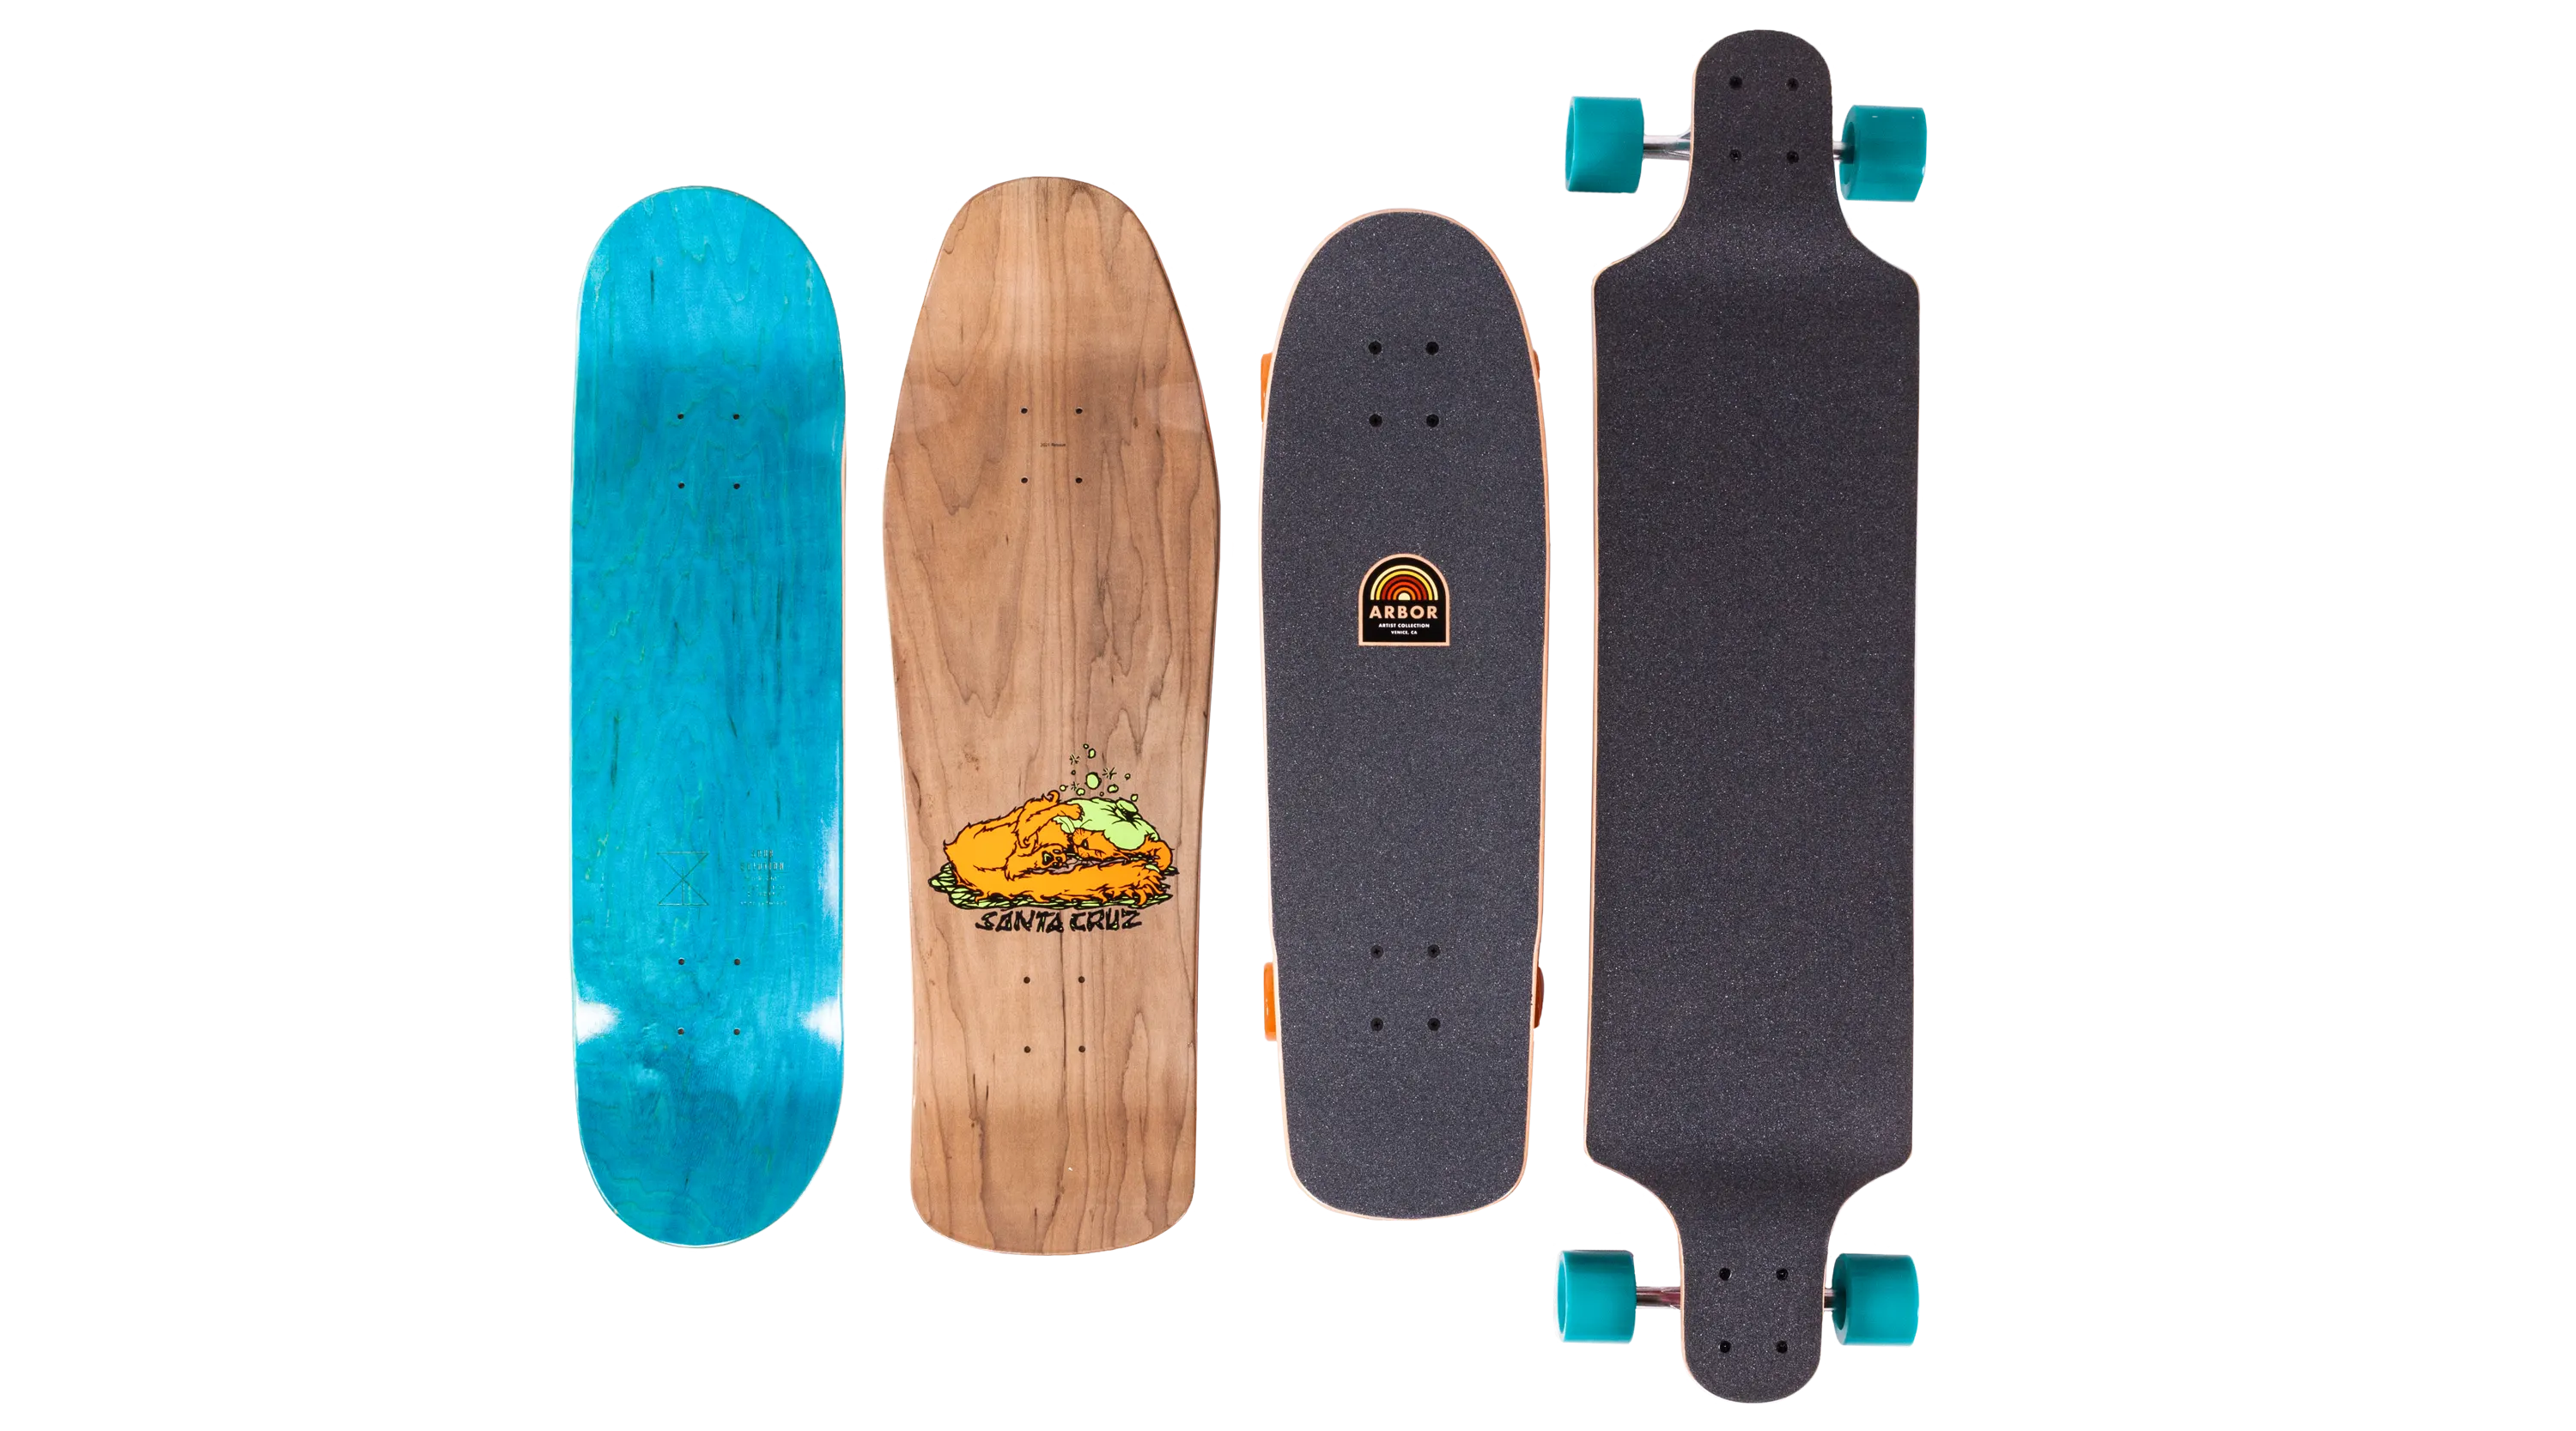 Here are 4 different types of skateboard decks.